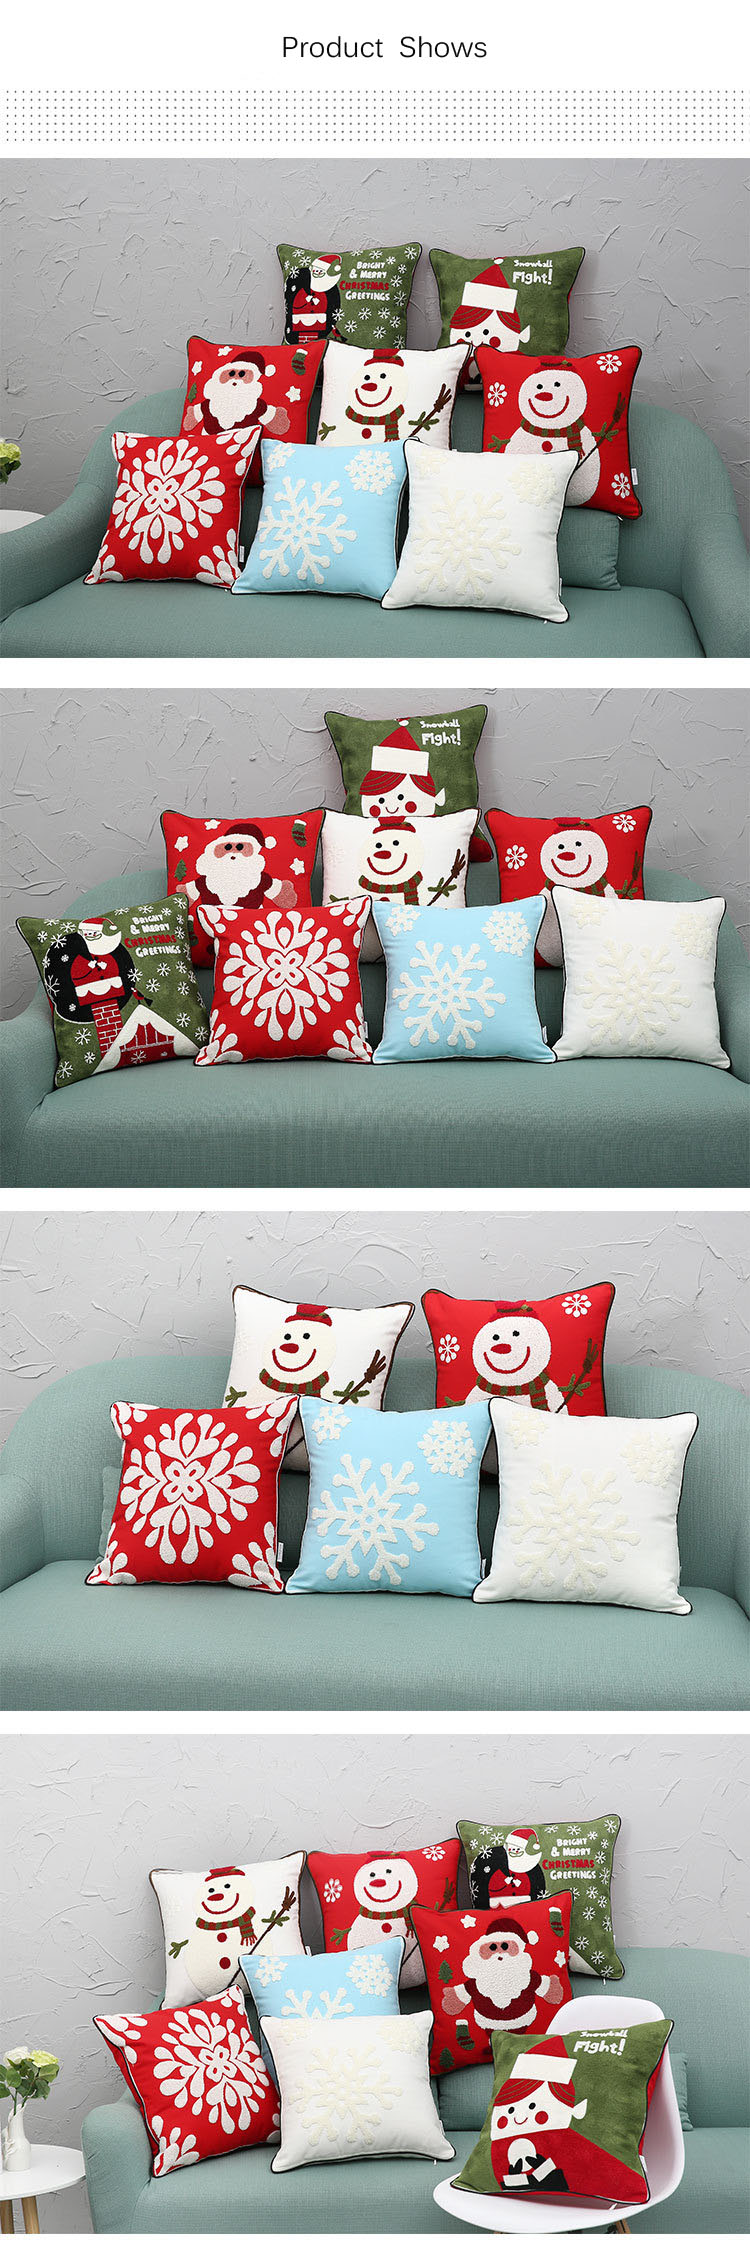 New-Christmas-Pure-Cotton-Embroidering-Pillow-Cases-Santa-Snowflake-Cushion-Cover-1214423-7